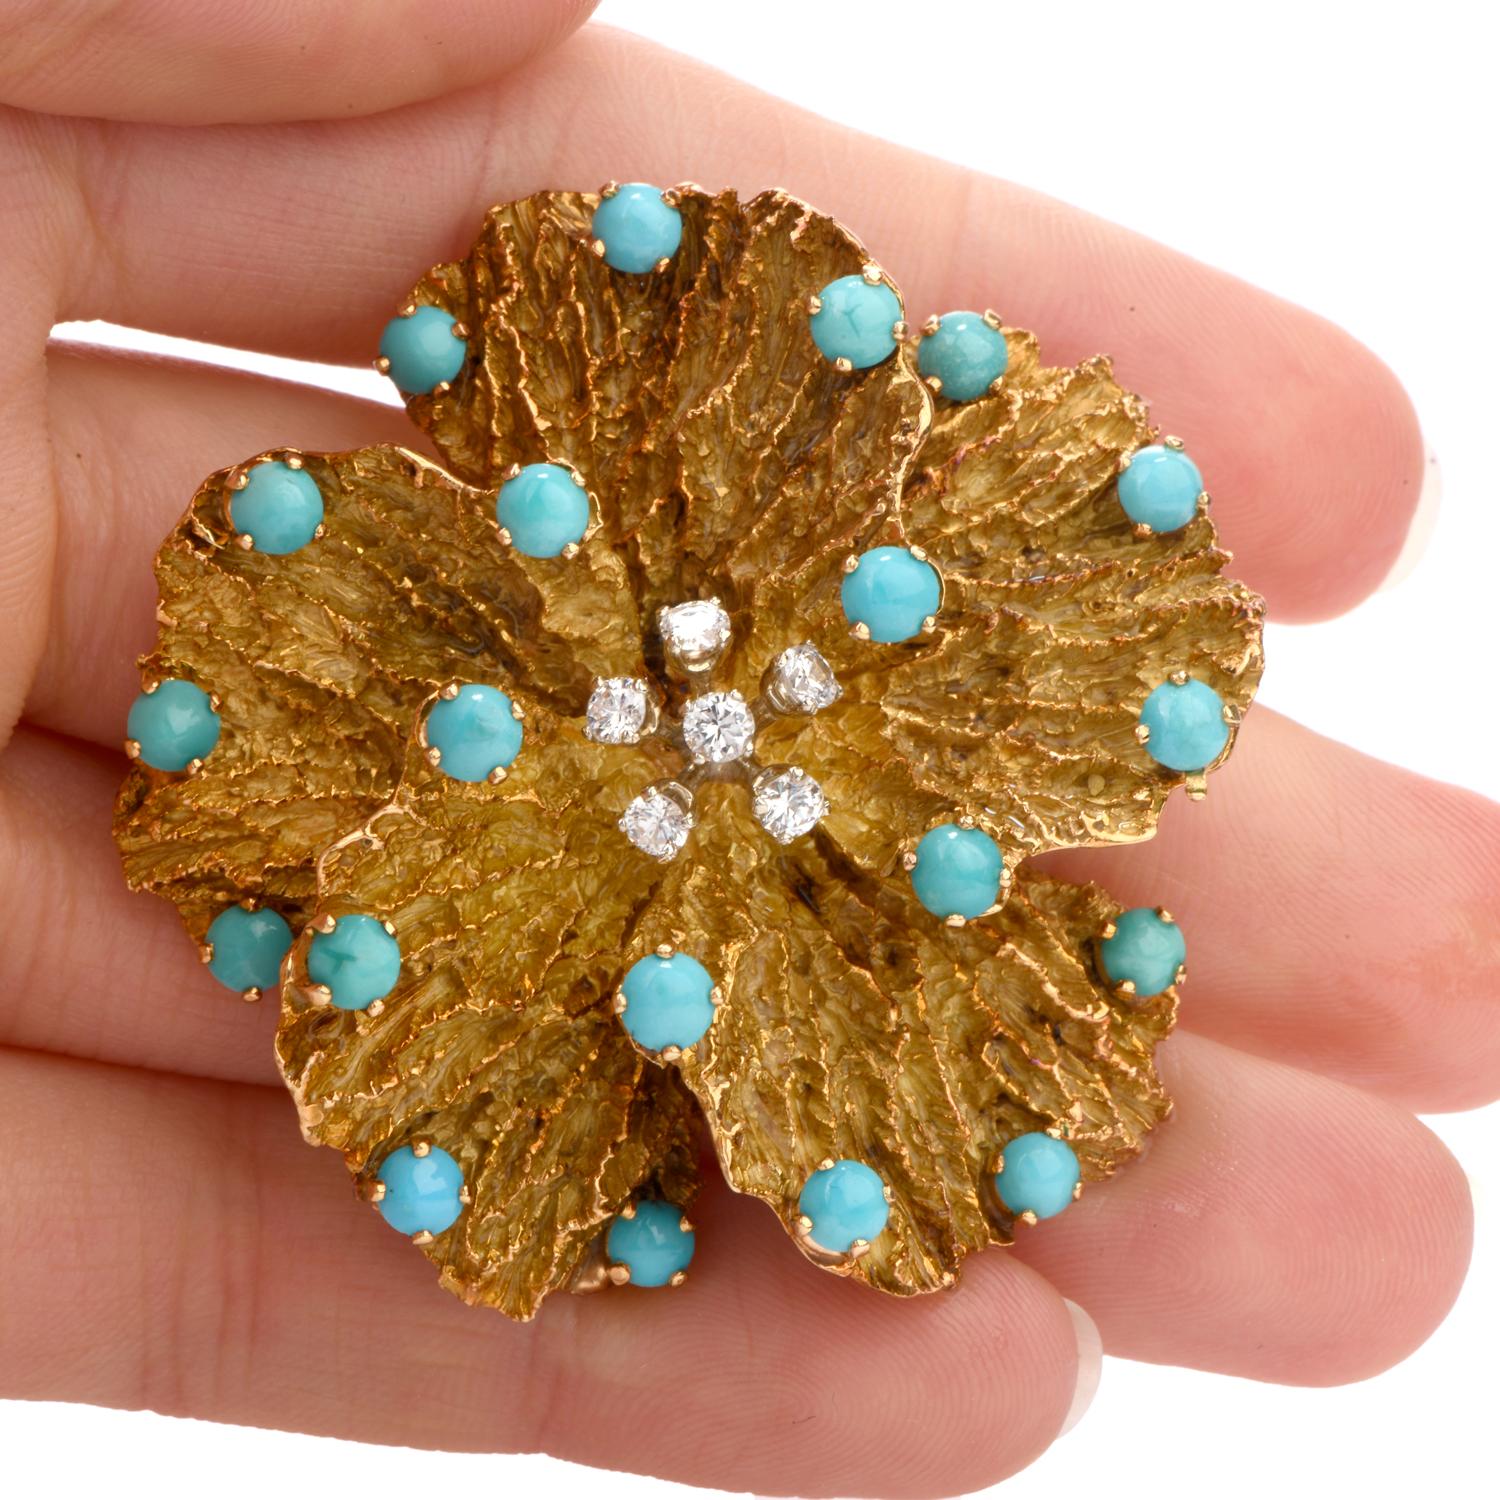 A flower of any kind warms the heart.

This vintage brooch 1970's  was inspired in a Pansy flower motif and 

crafted in 52.4 grams of 18K yellow gold.

The center of the flower contains 5 round brilliant cut diamonds prong set and 

weighing appx.